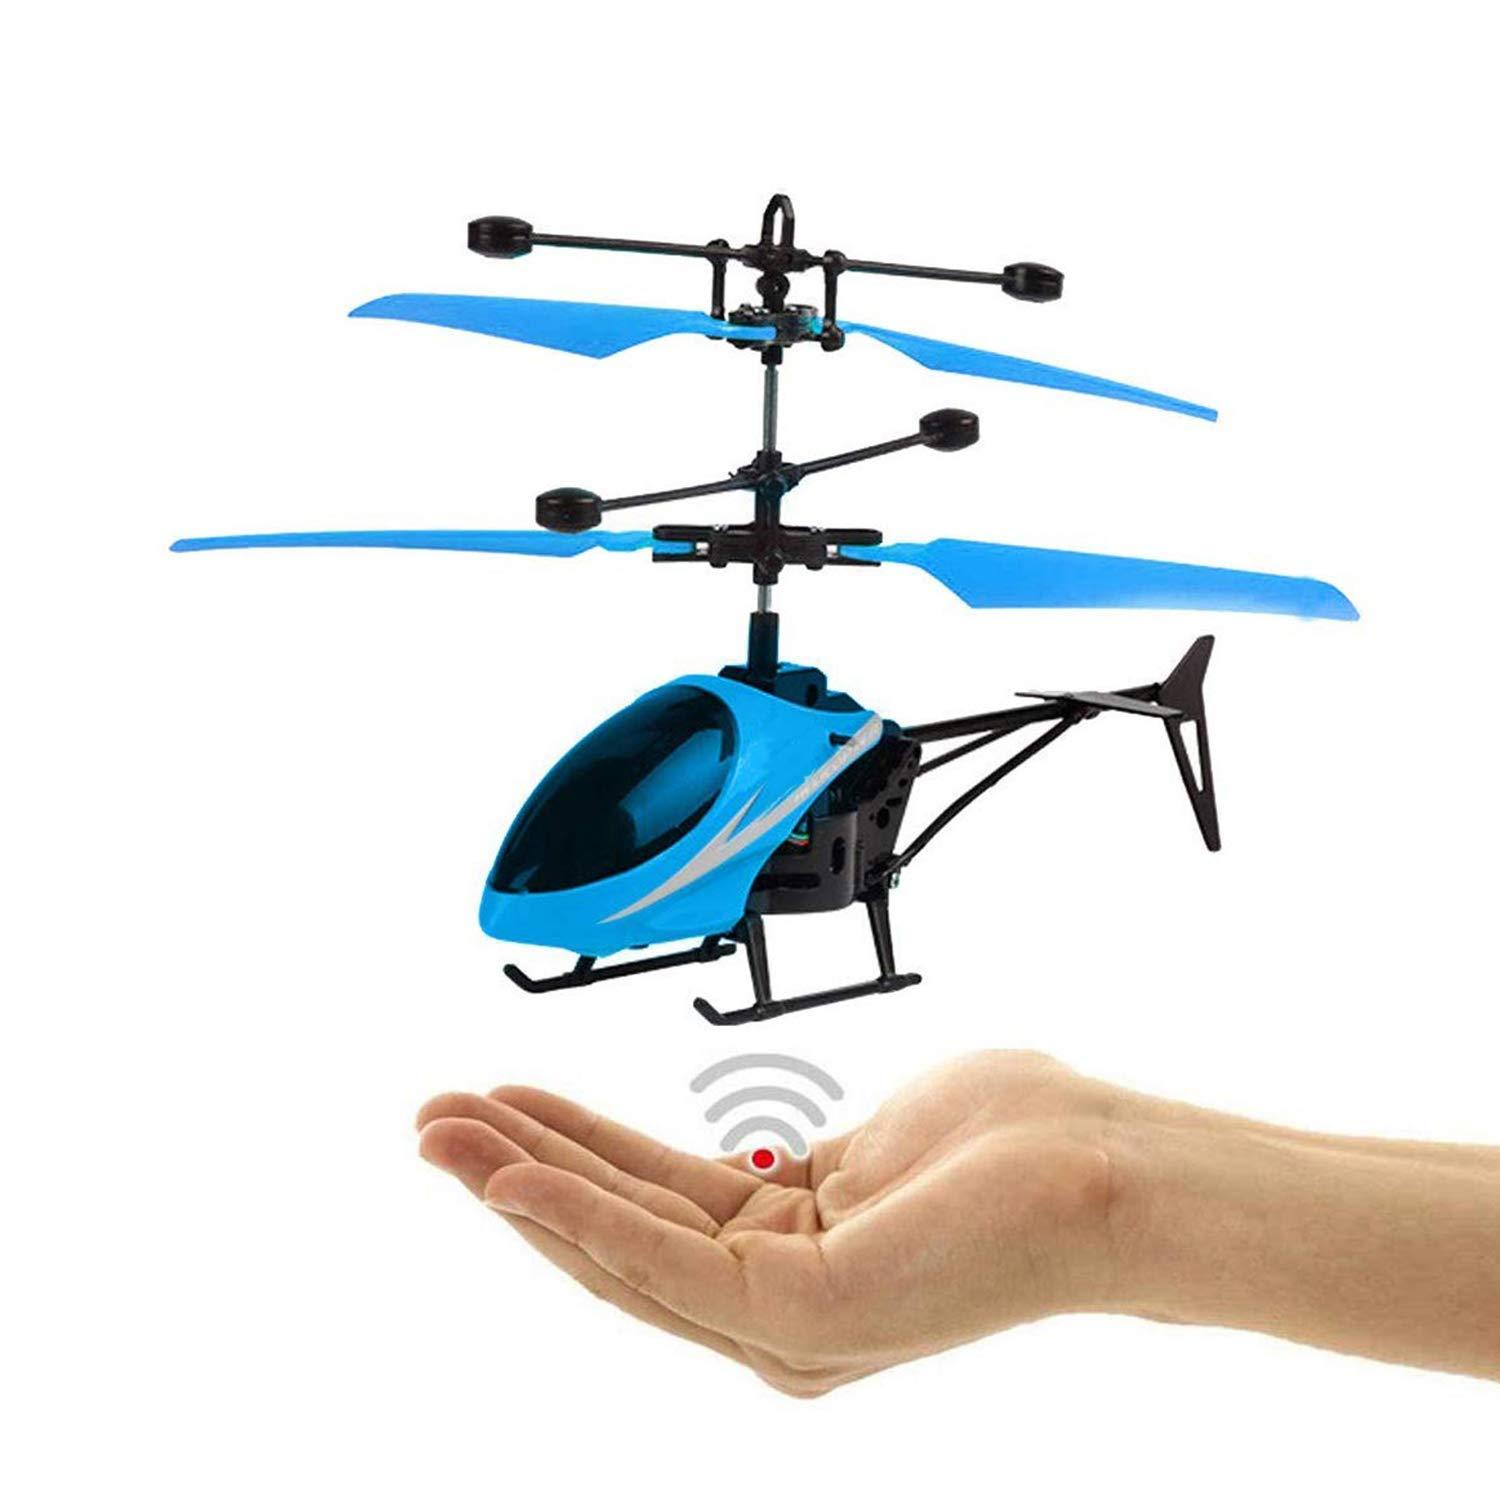 Rc Sensor Helicopter:  Increased Automation. 